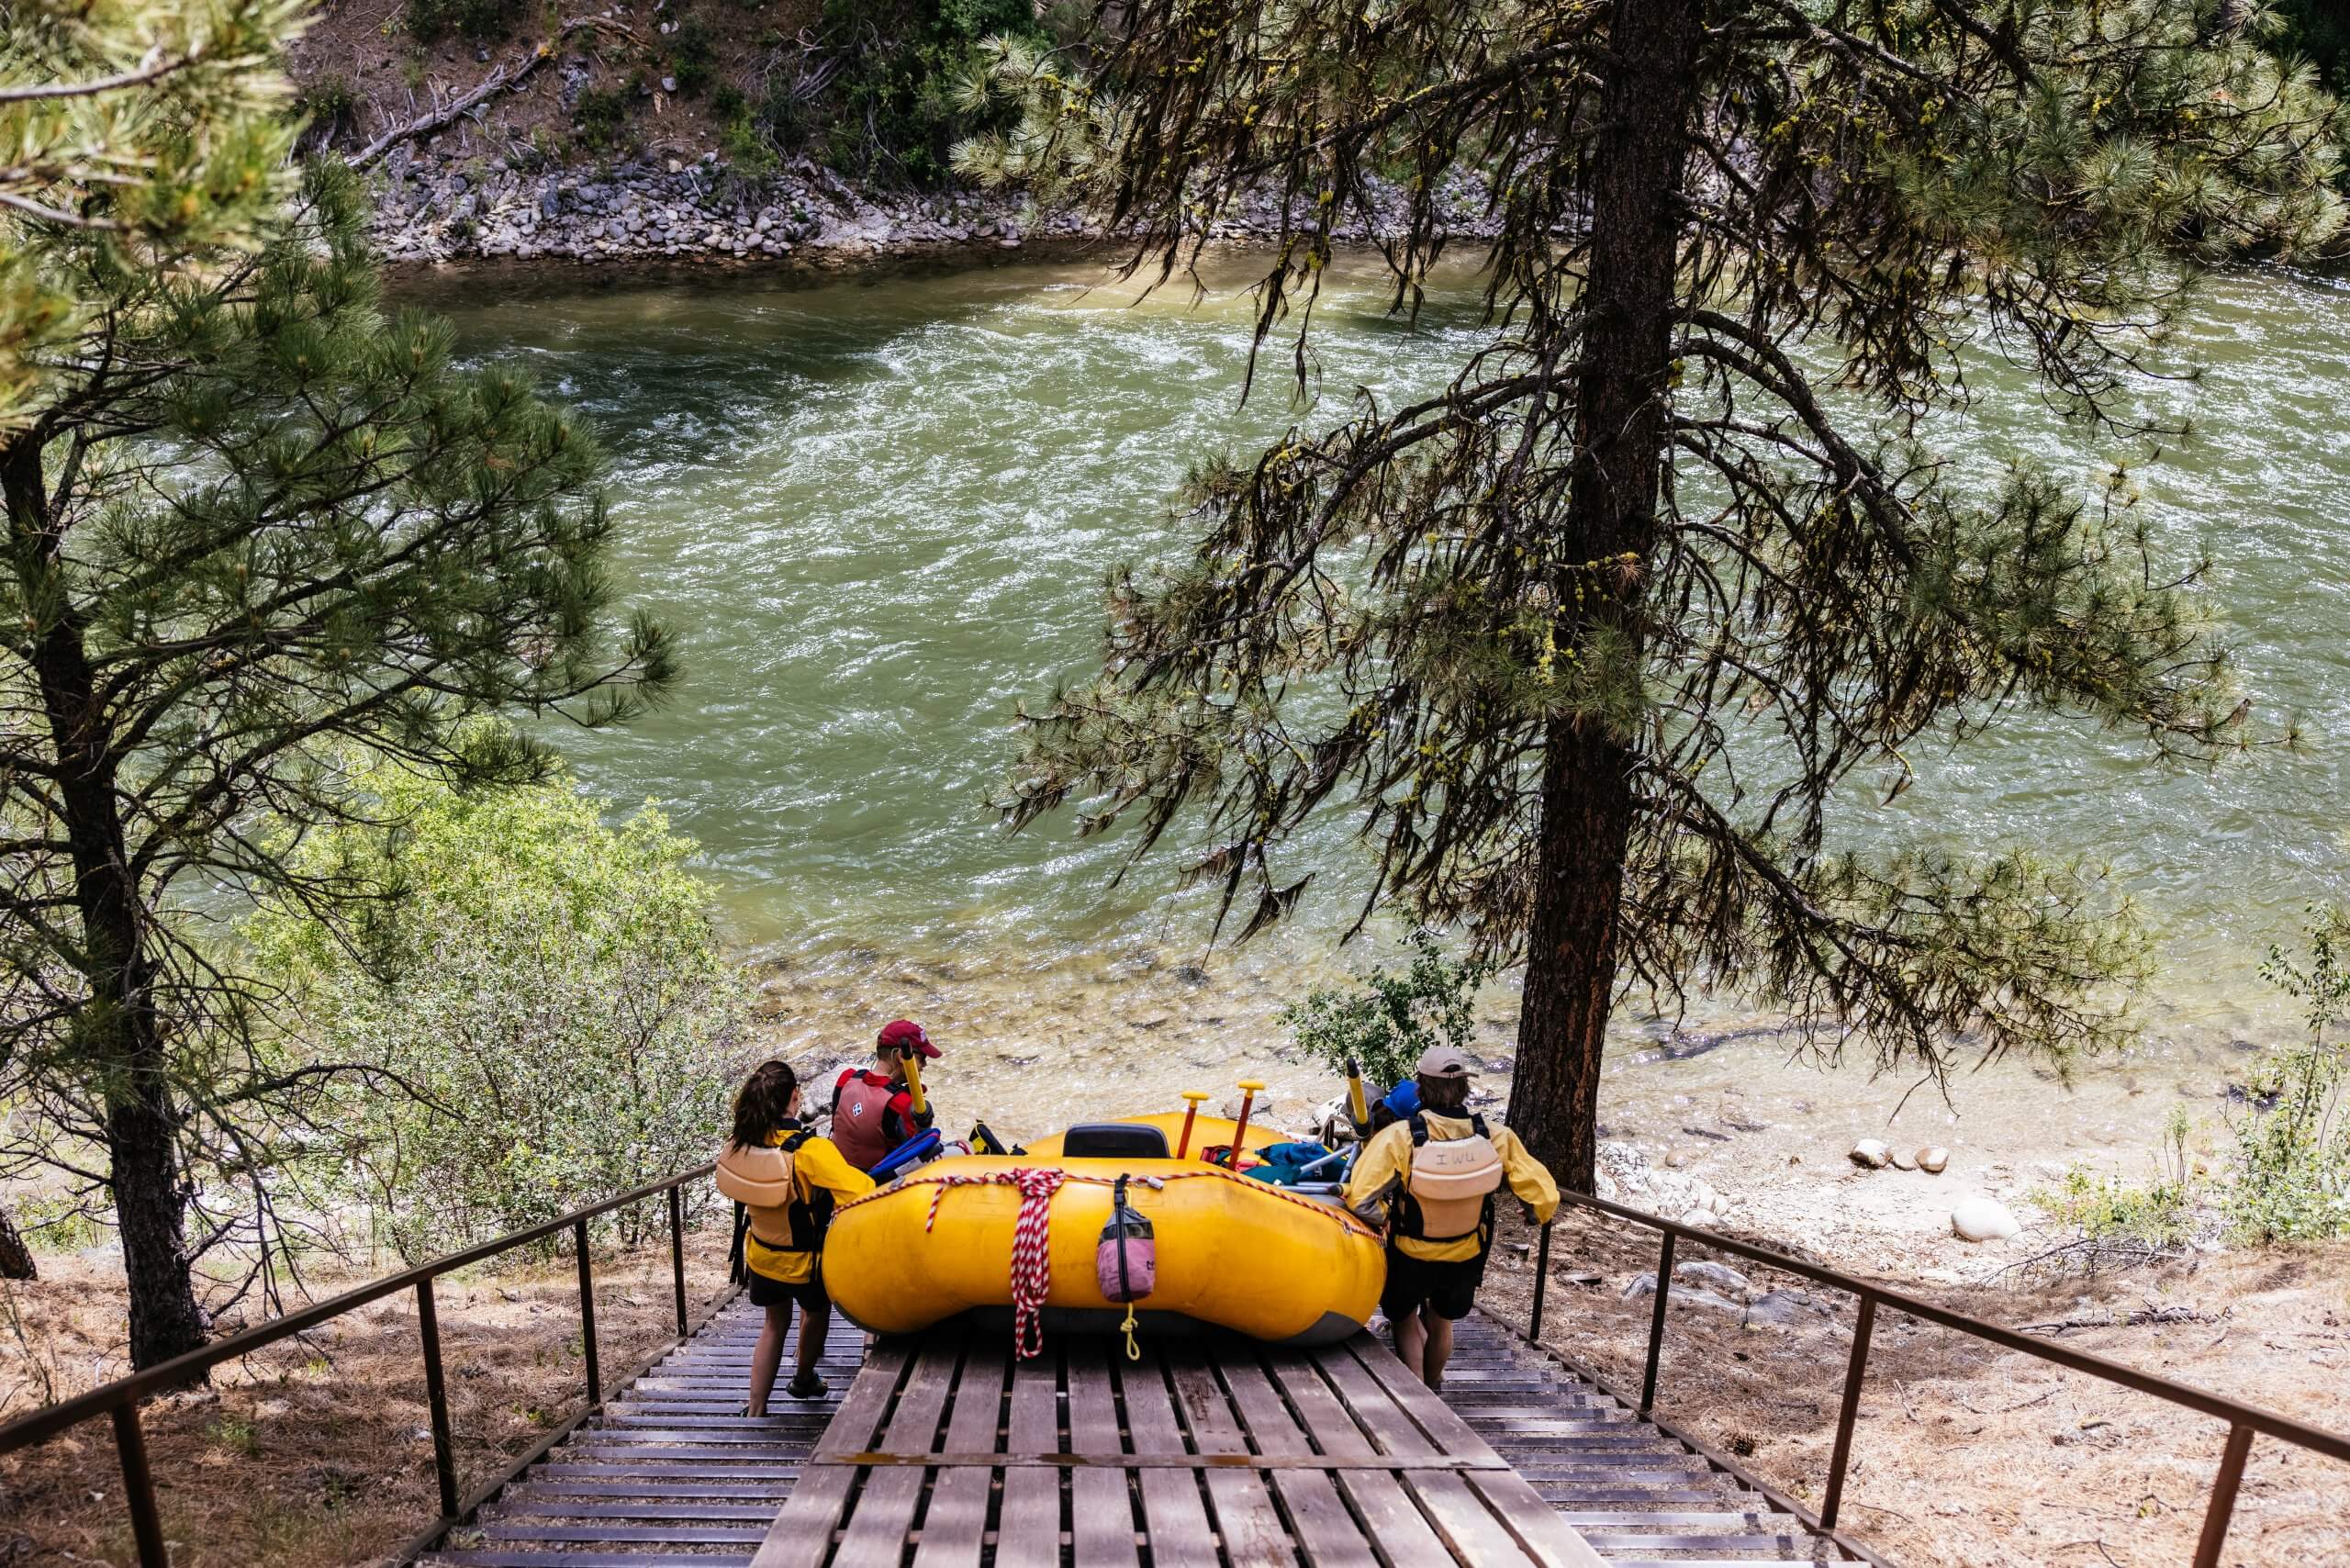 Group of people launching a rafting boat at Swirly Canyon